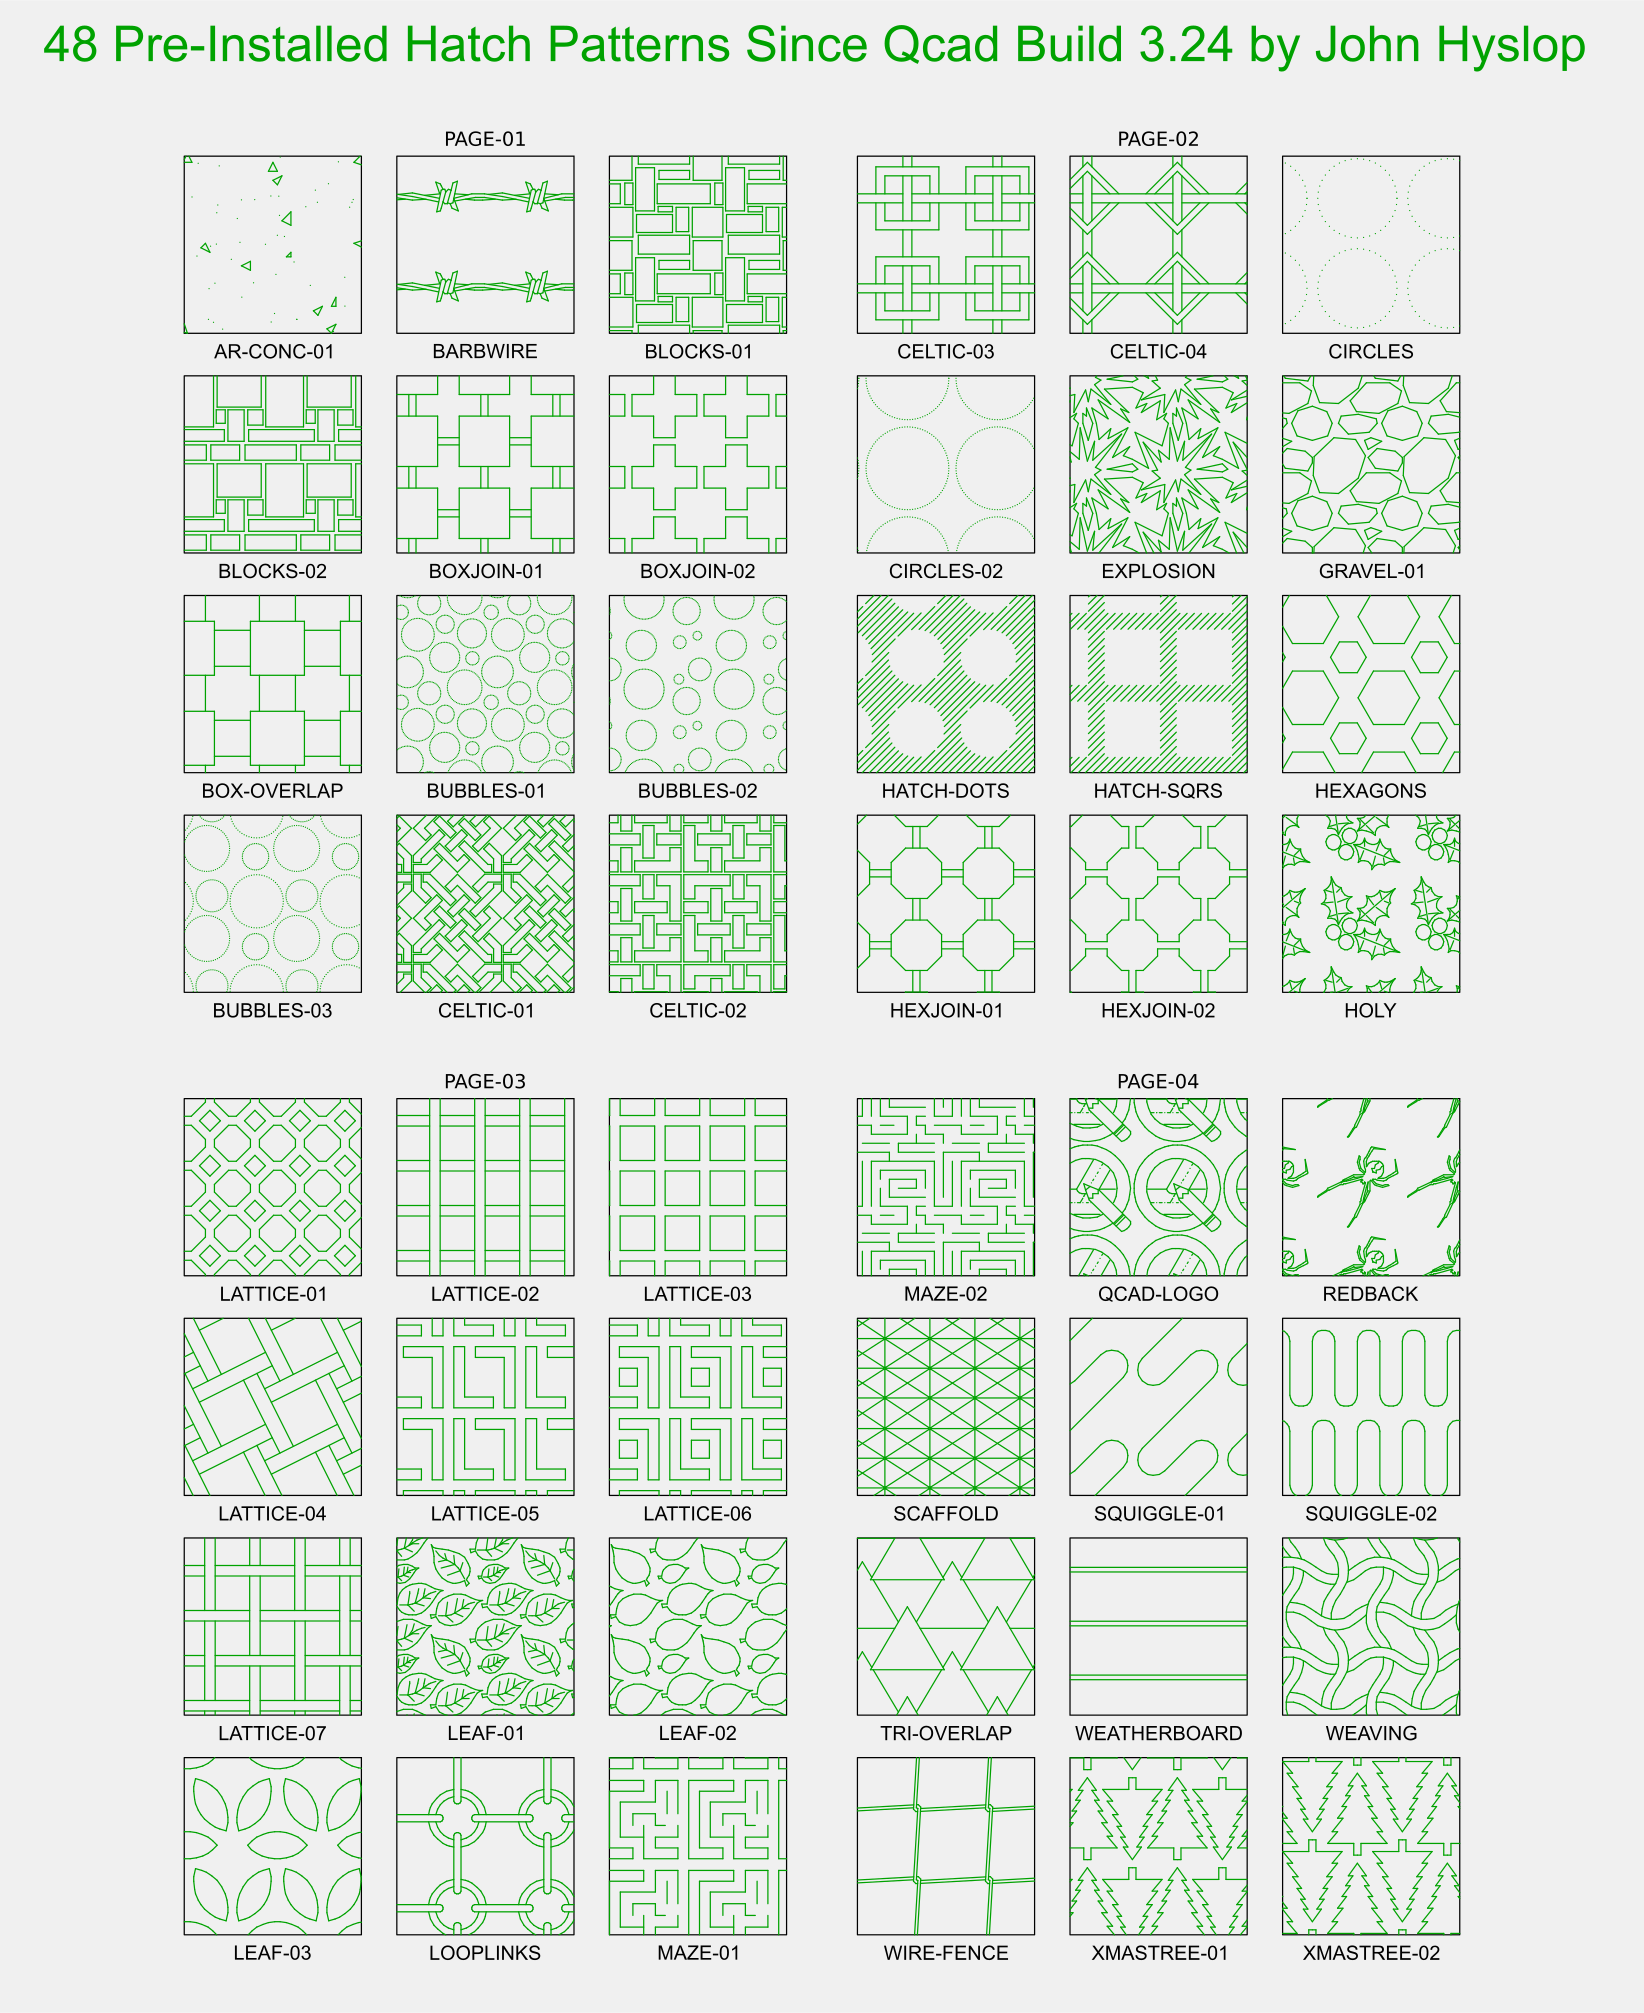 Qcad - My Hatch Patterns - Pre-Installed Since 3.24.png